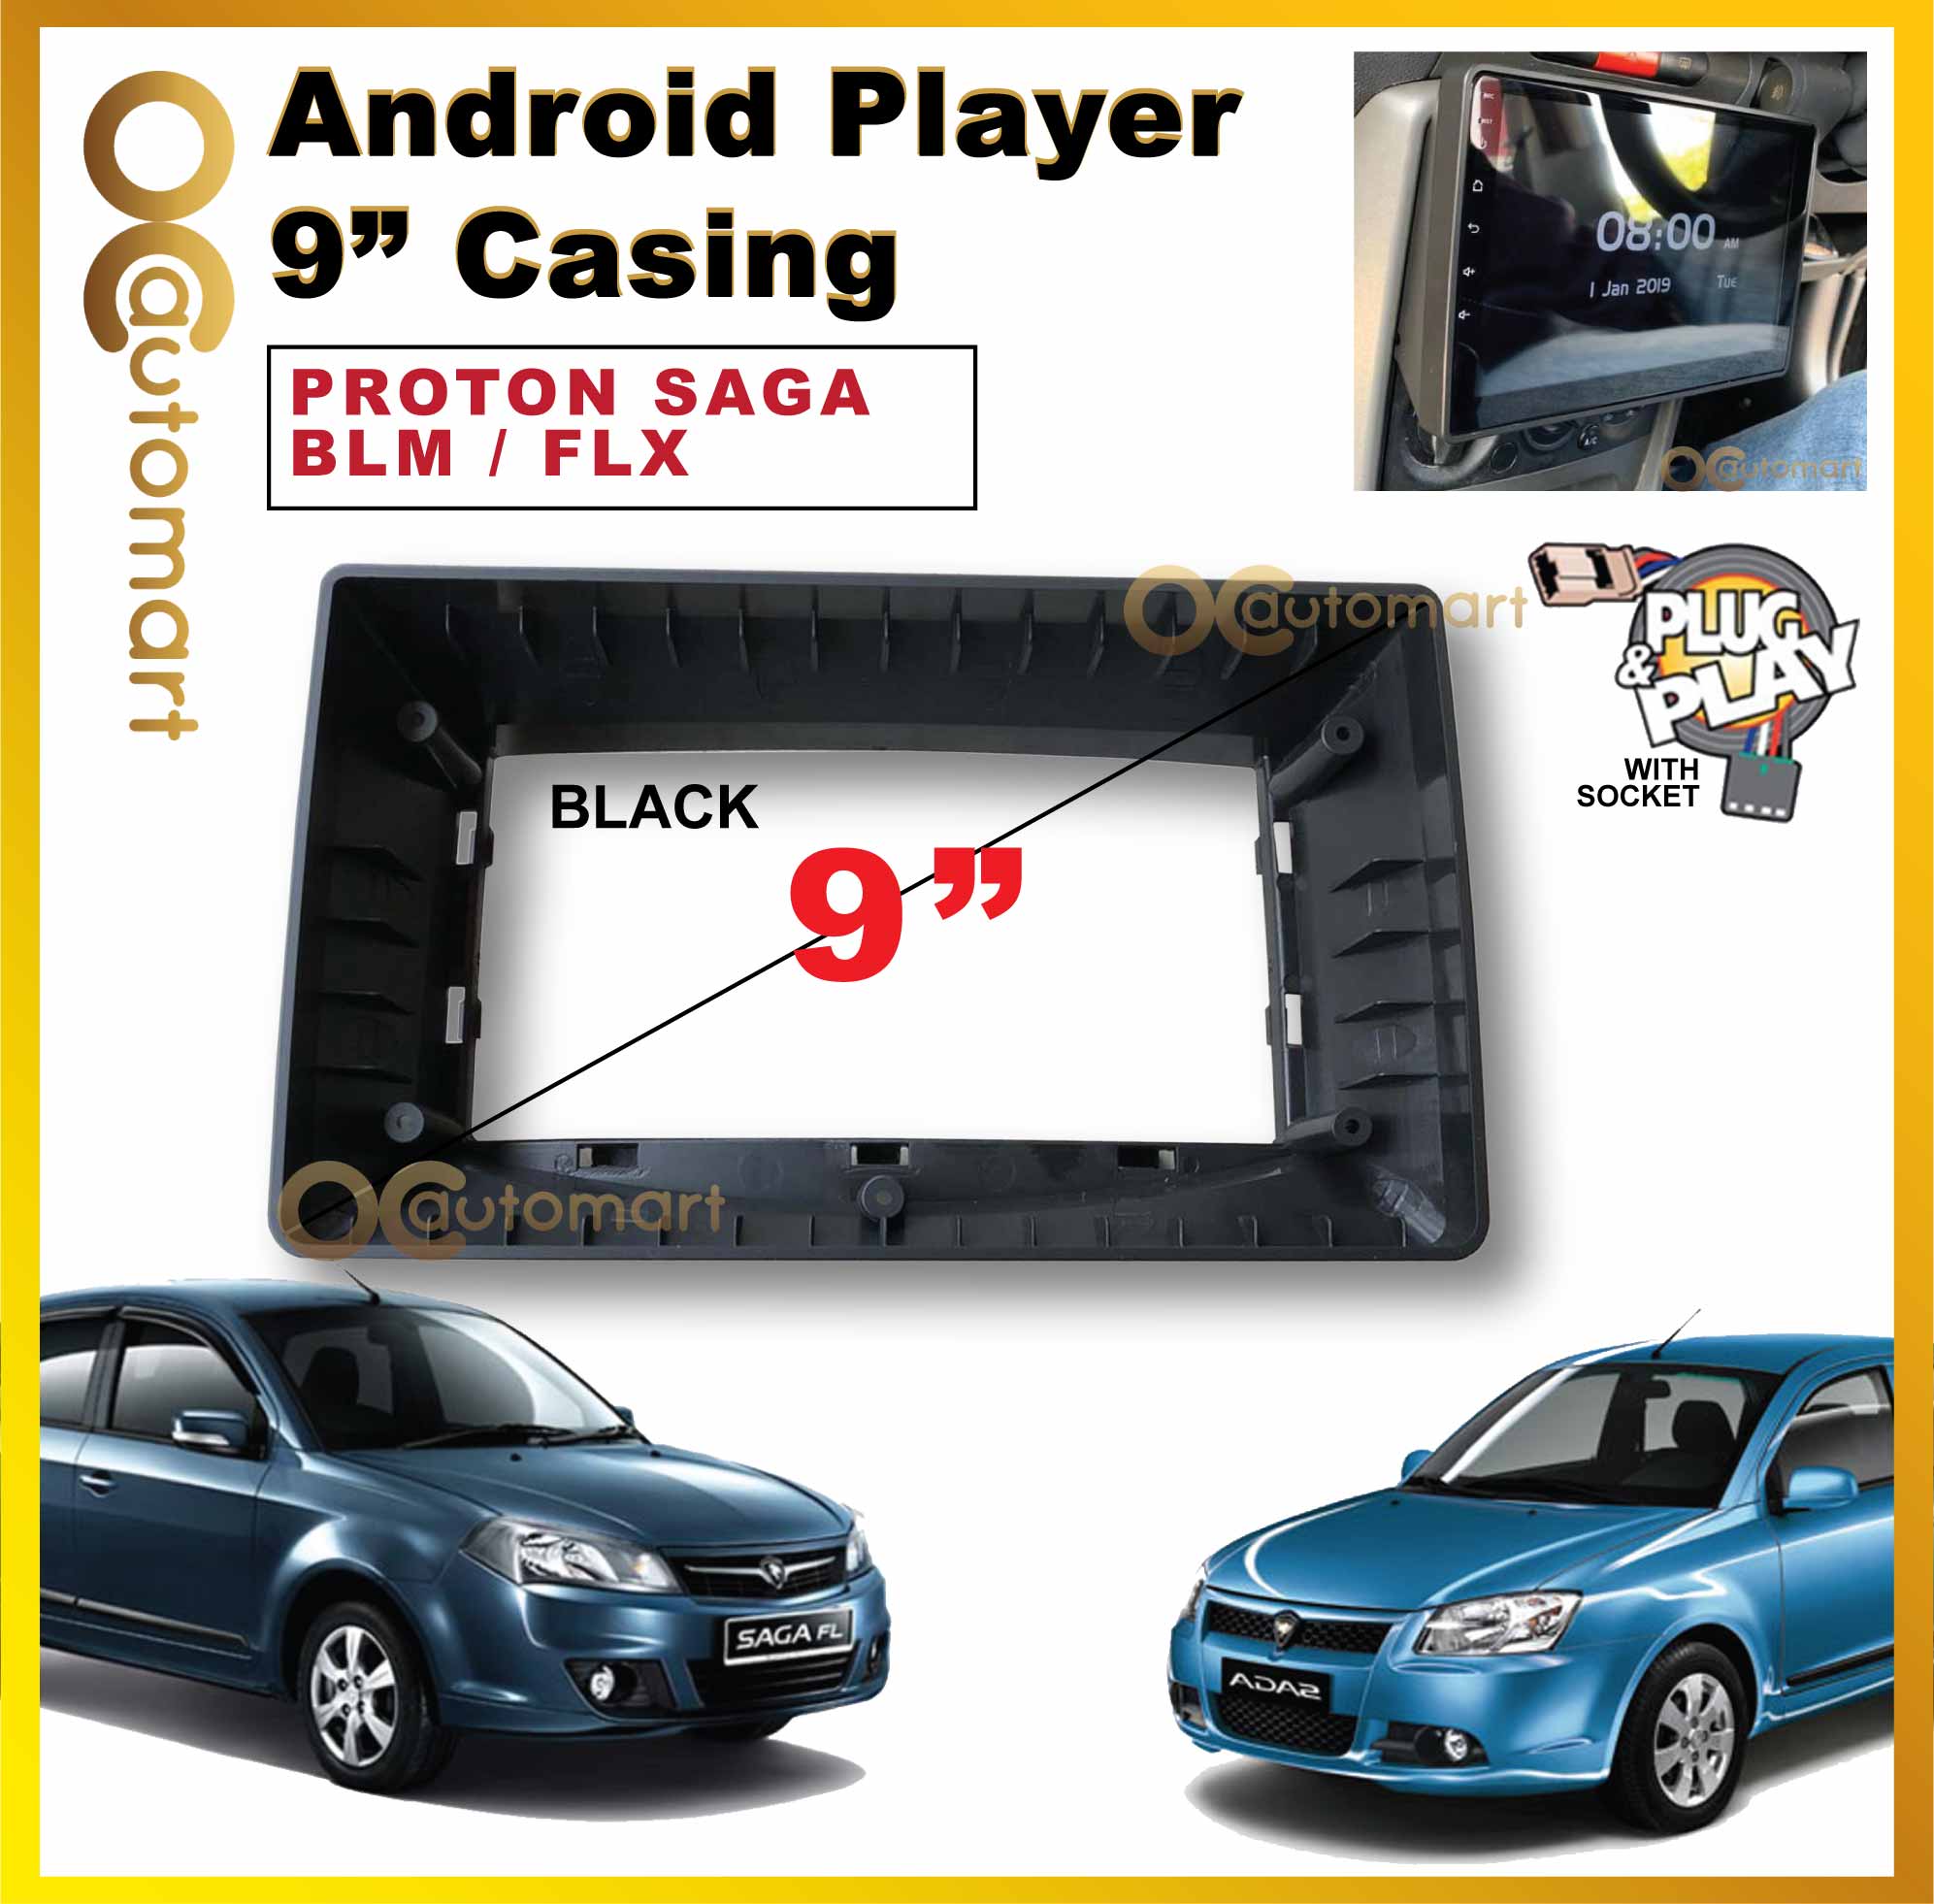 Proton Saga BLM / FLX 2008-2015 Android Player Casing 9" Inch